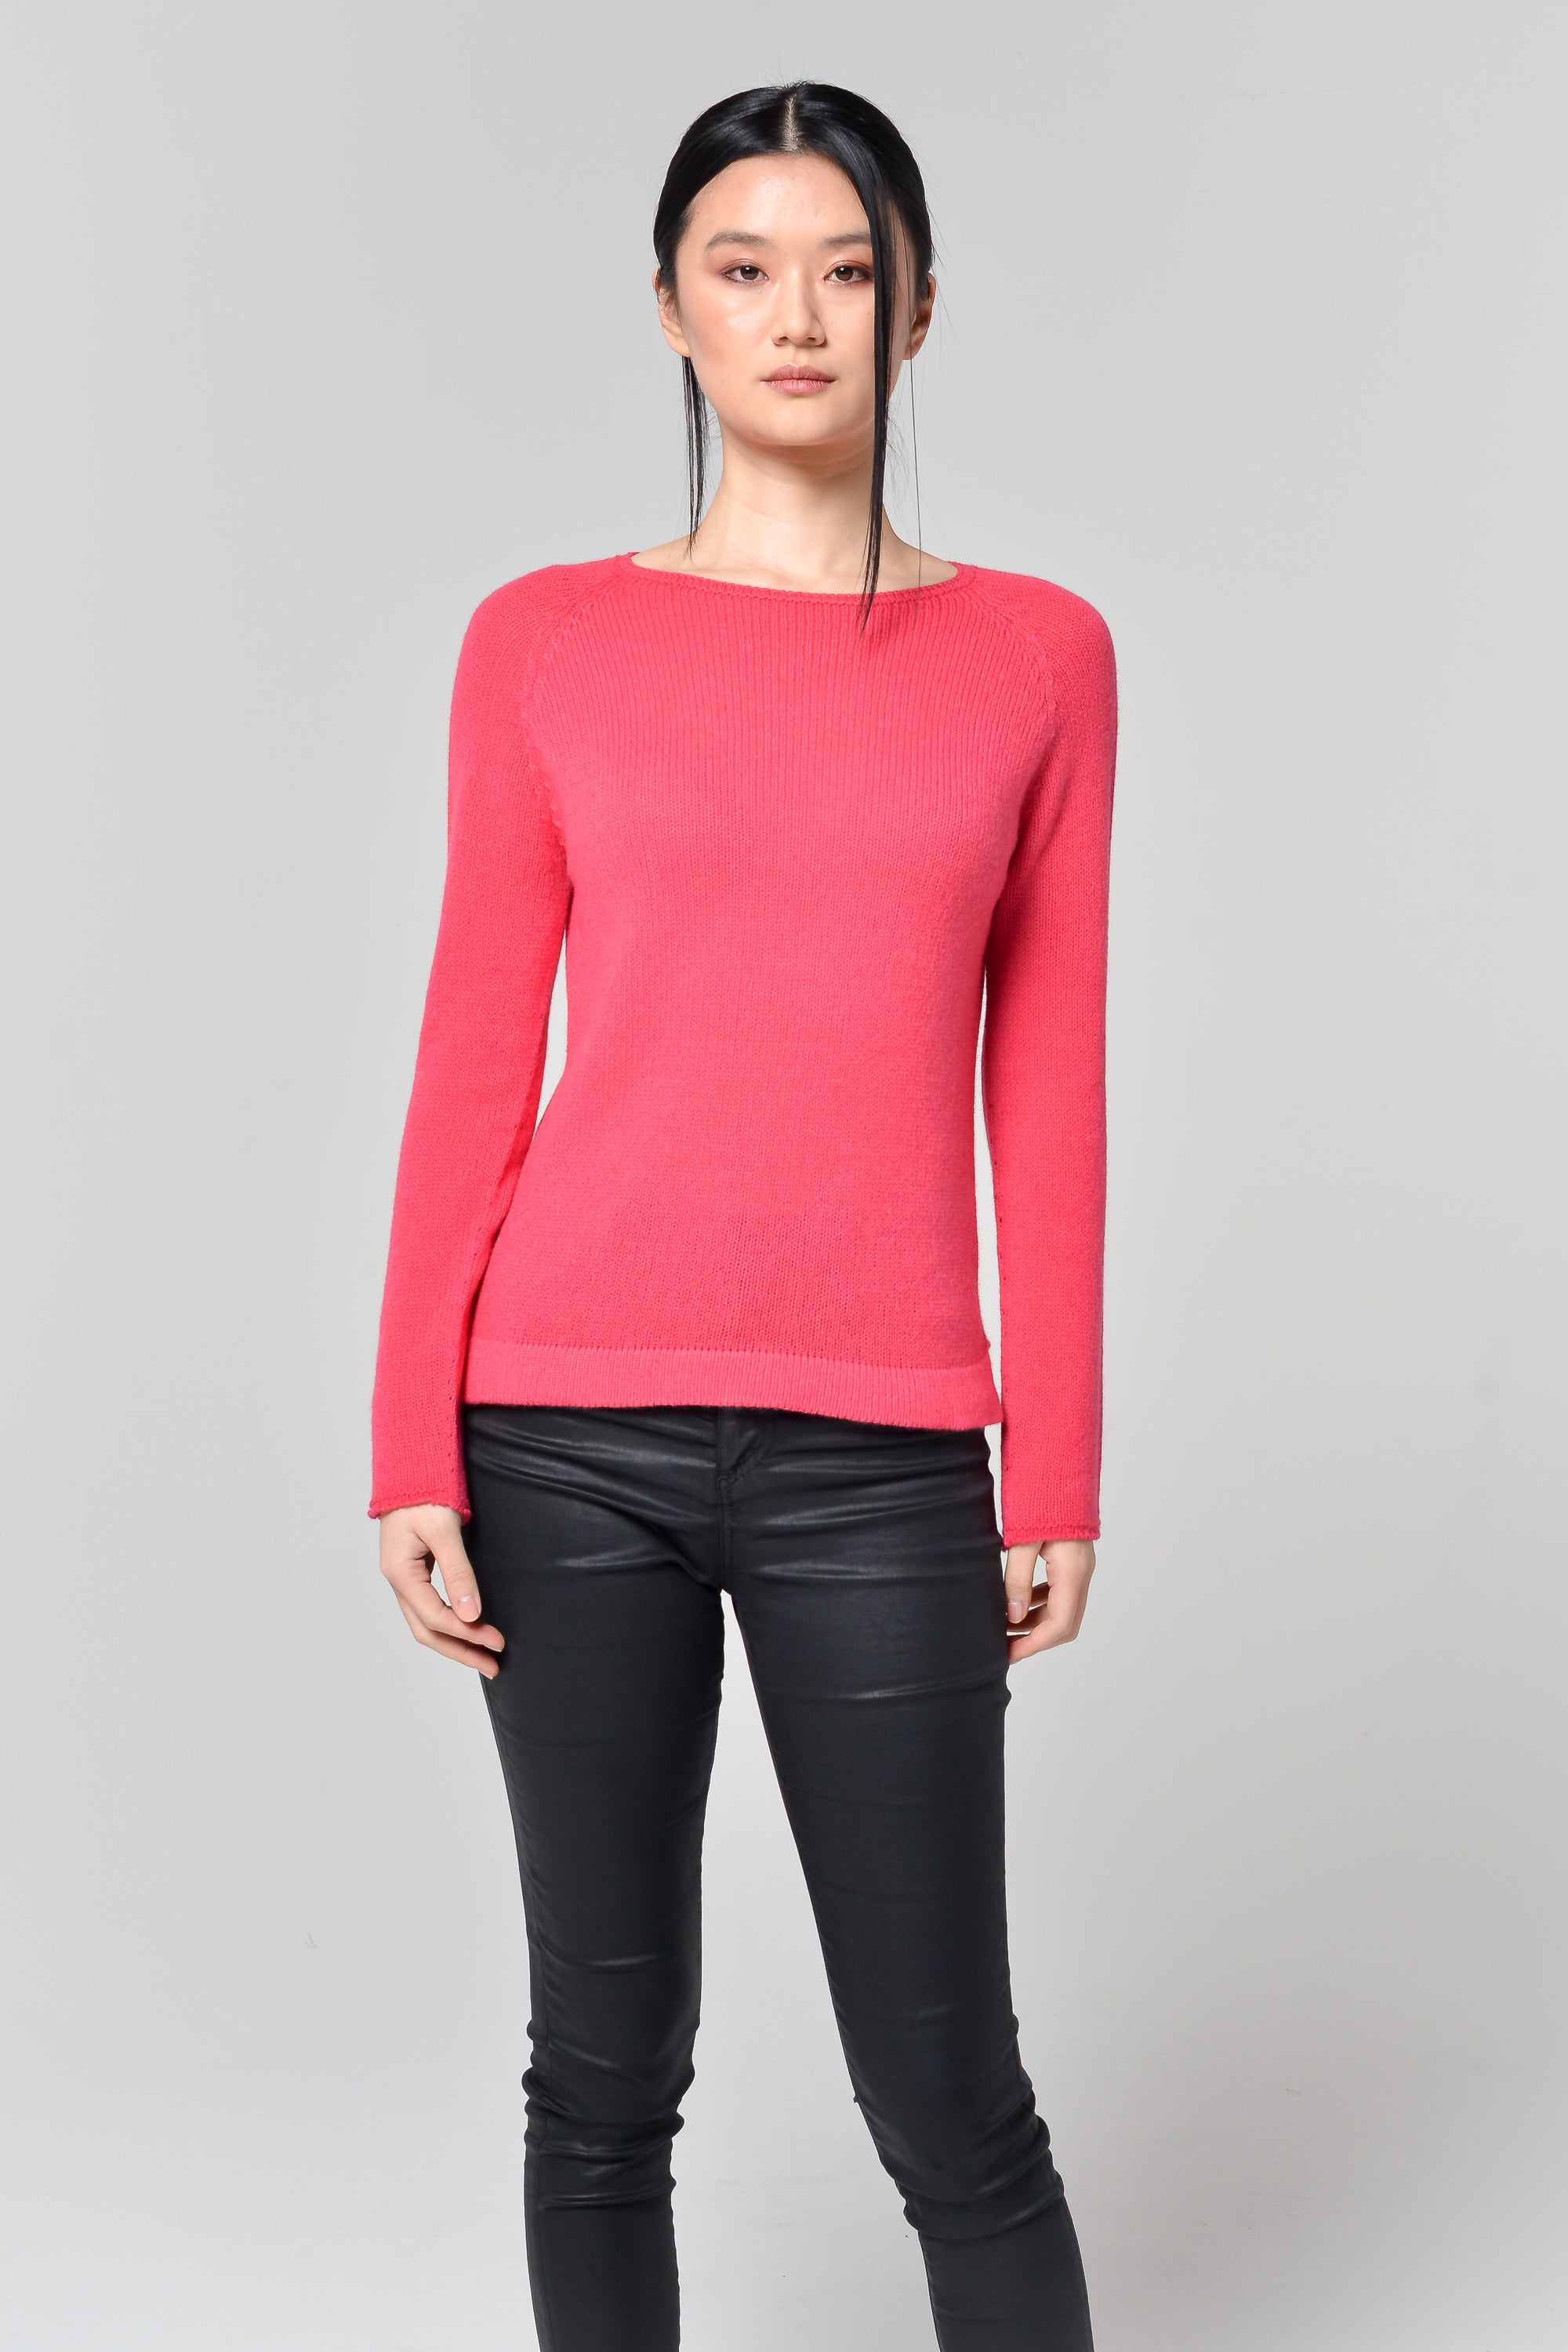 Appin Sweater - Scarlet